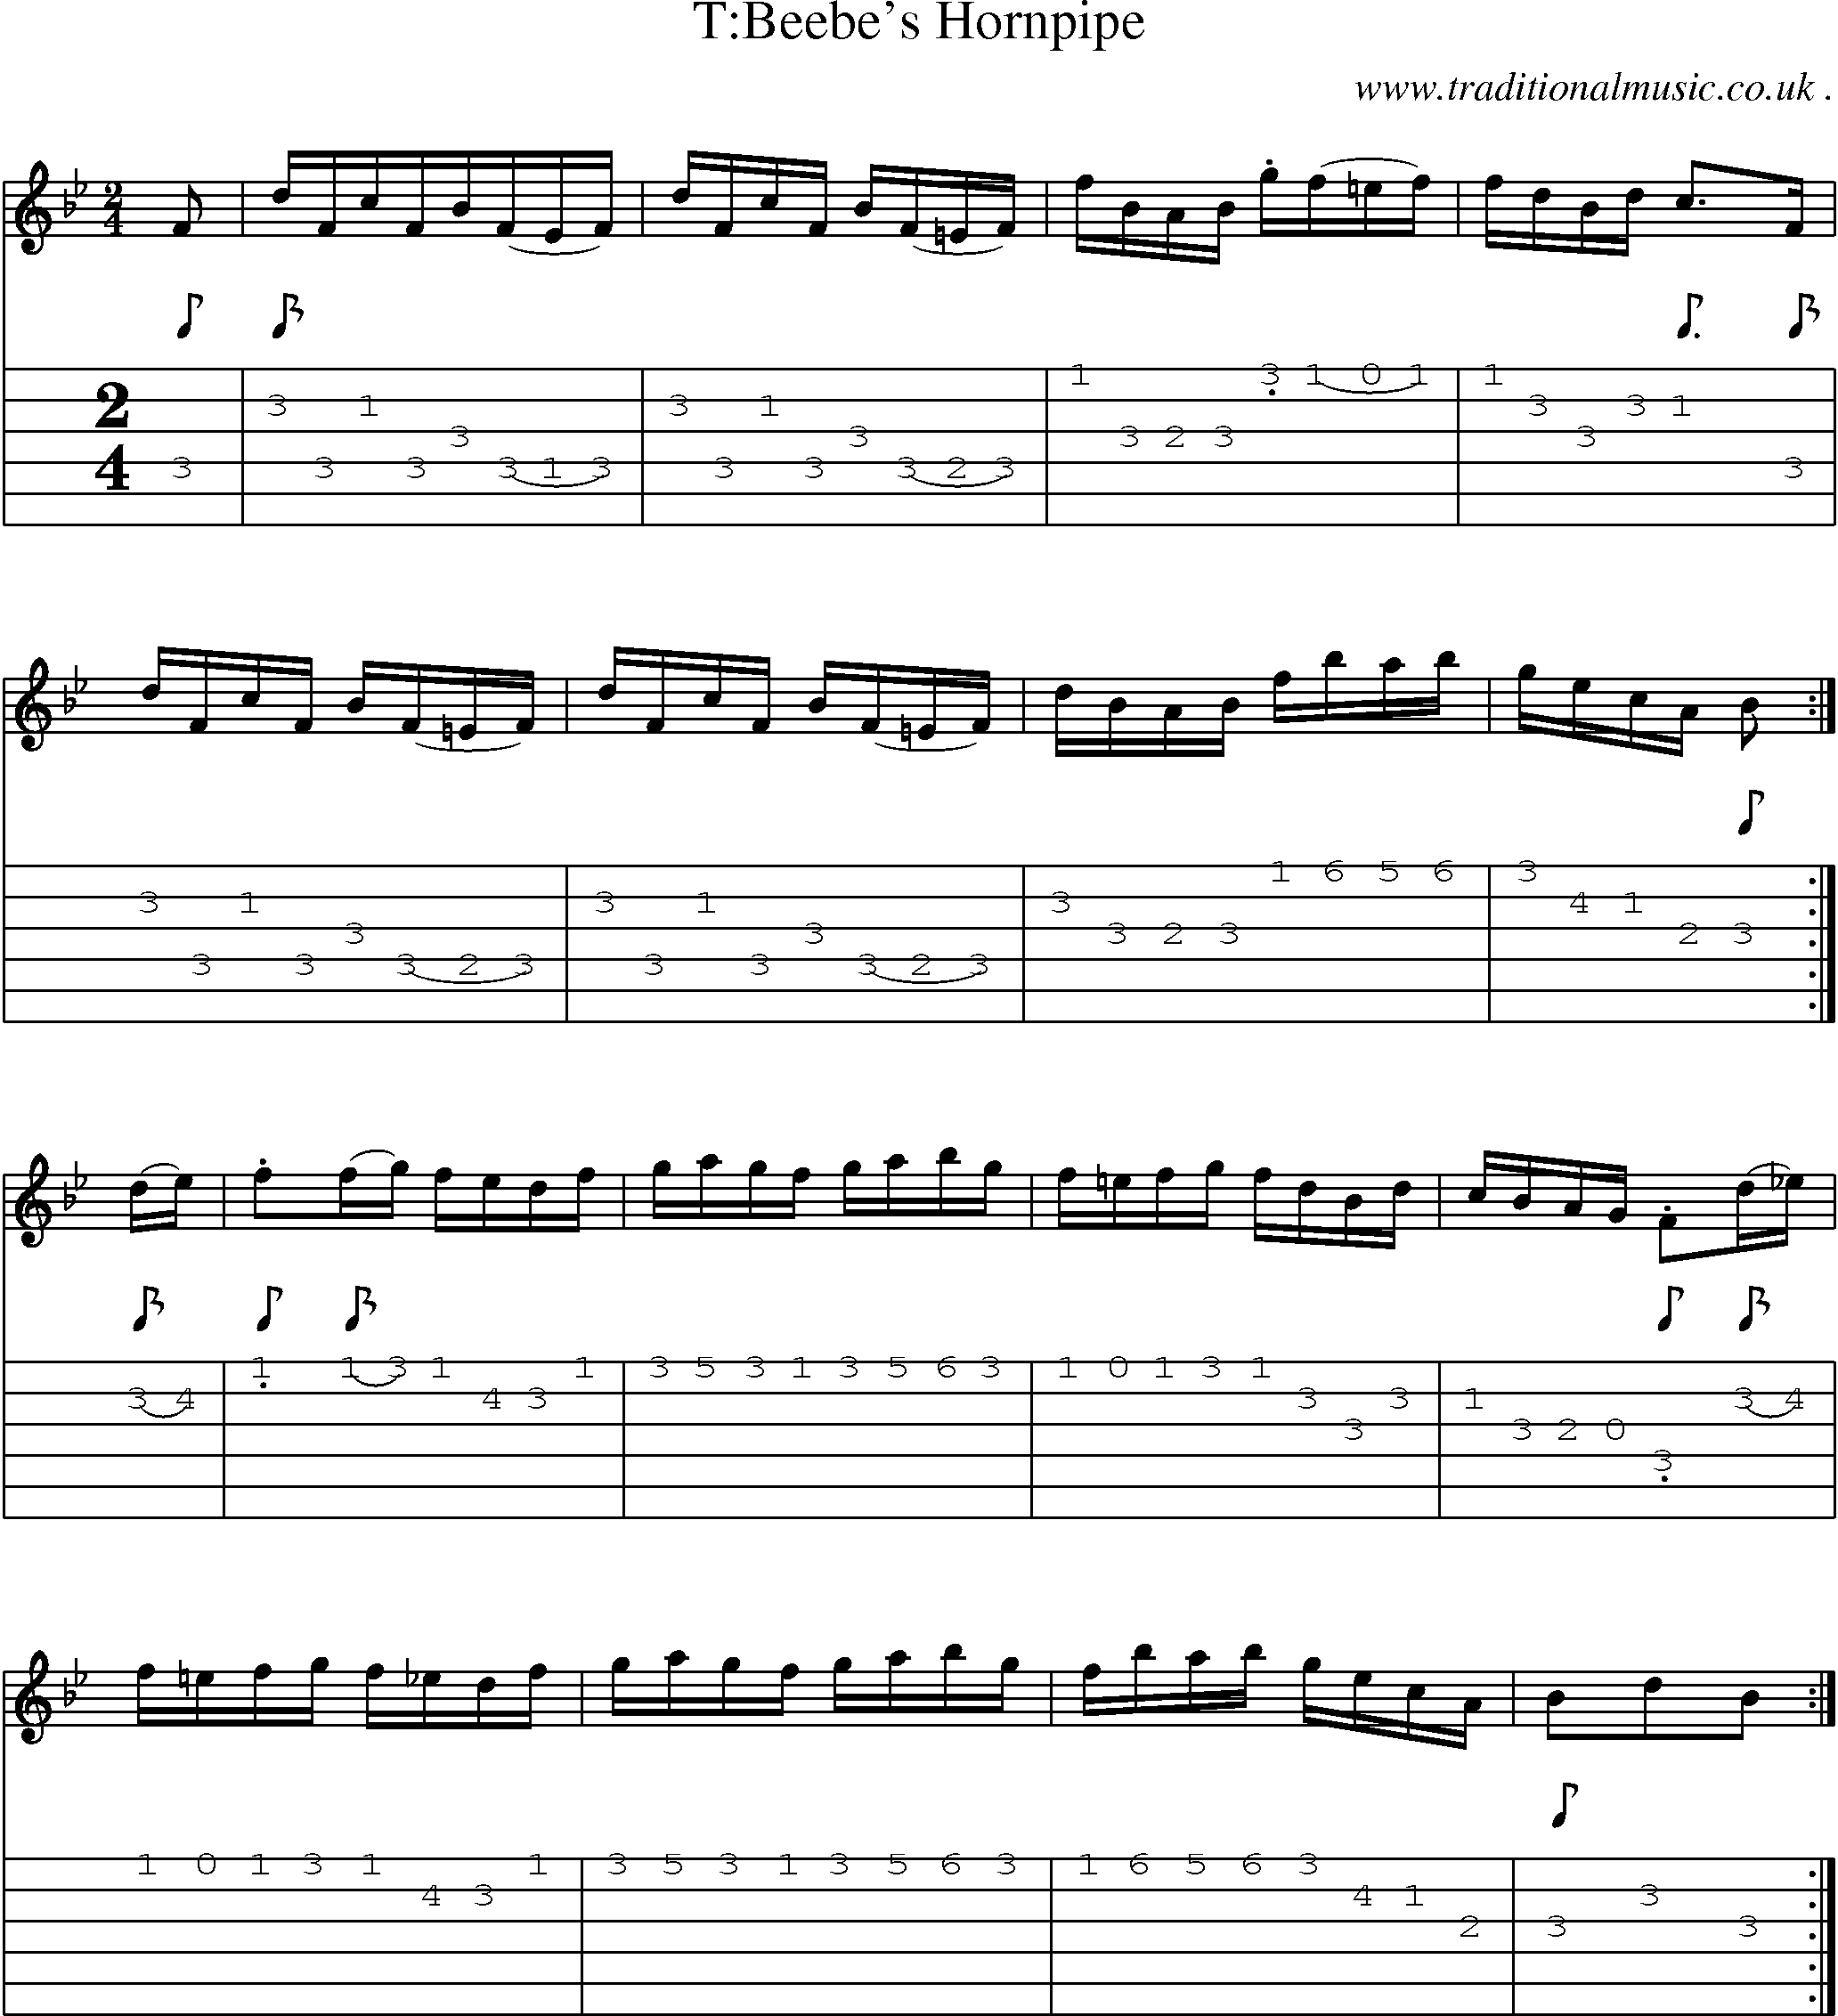 Sheet-Music and Guitar Tabs for Tbeebes Hornpipe